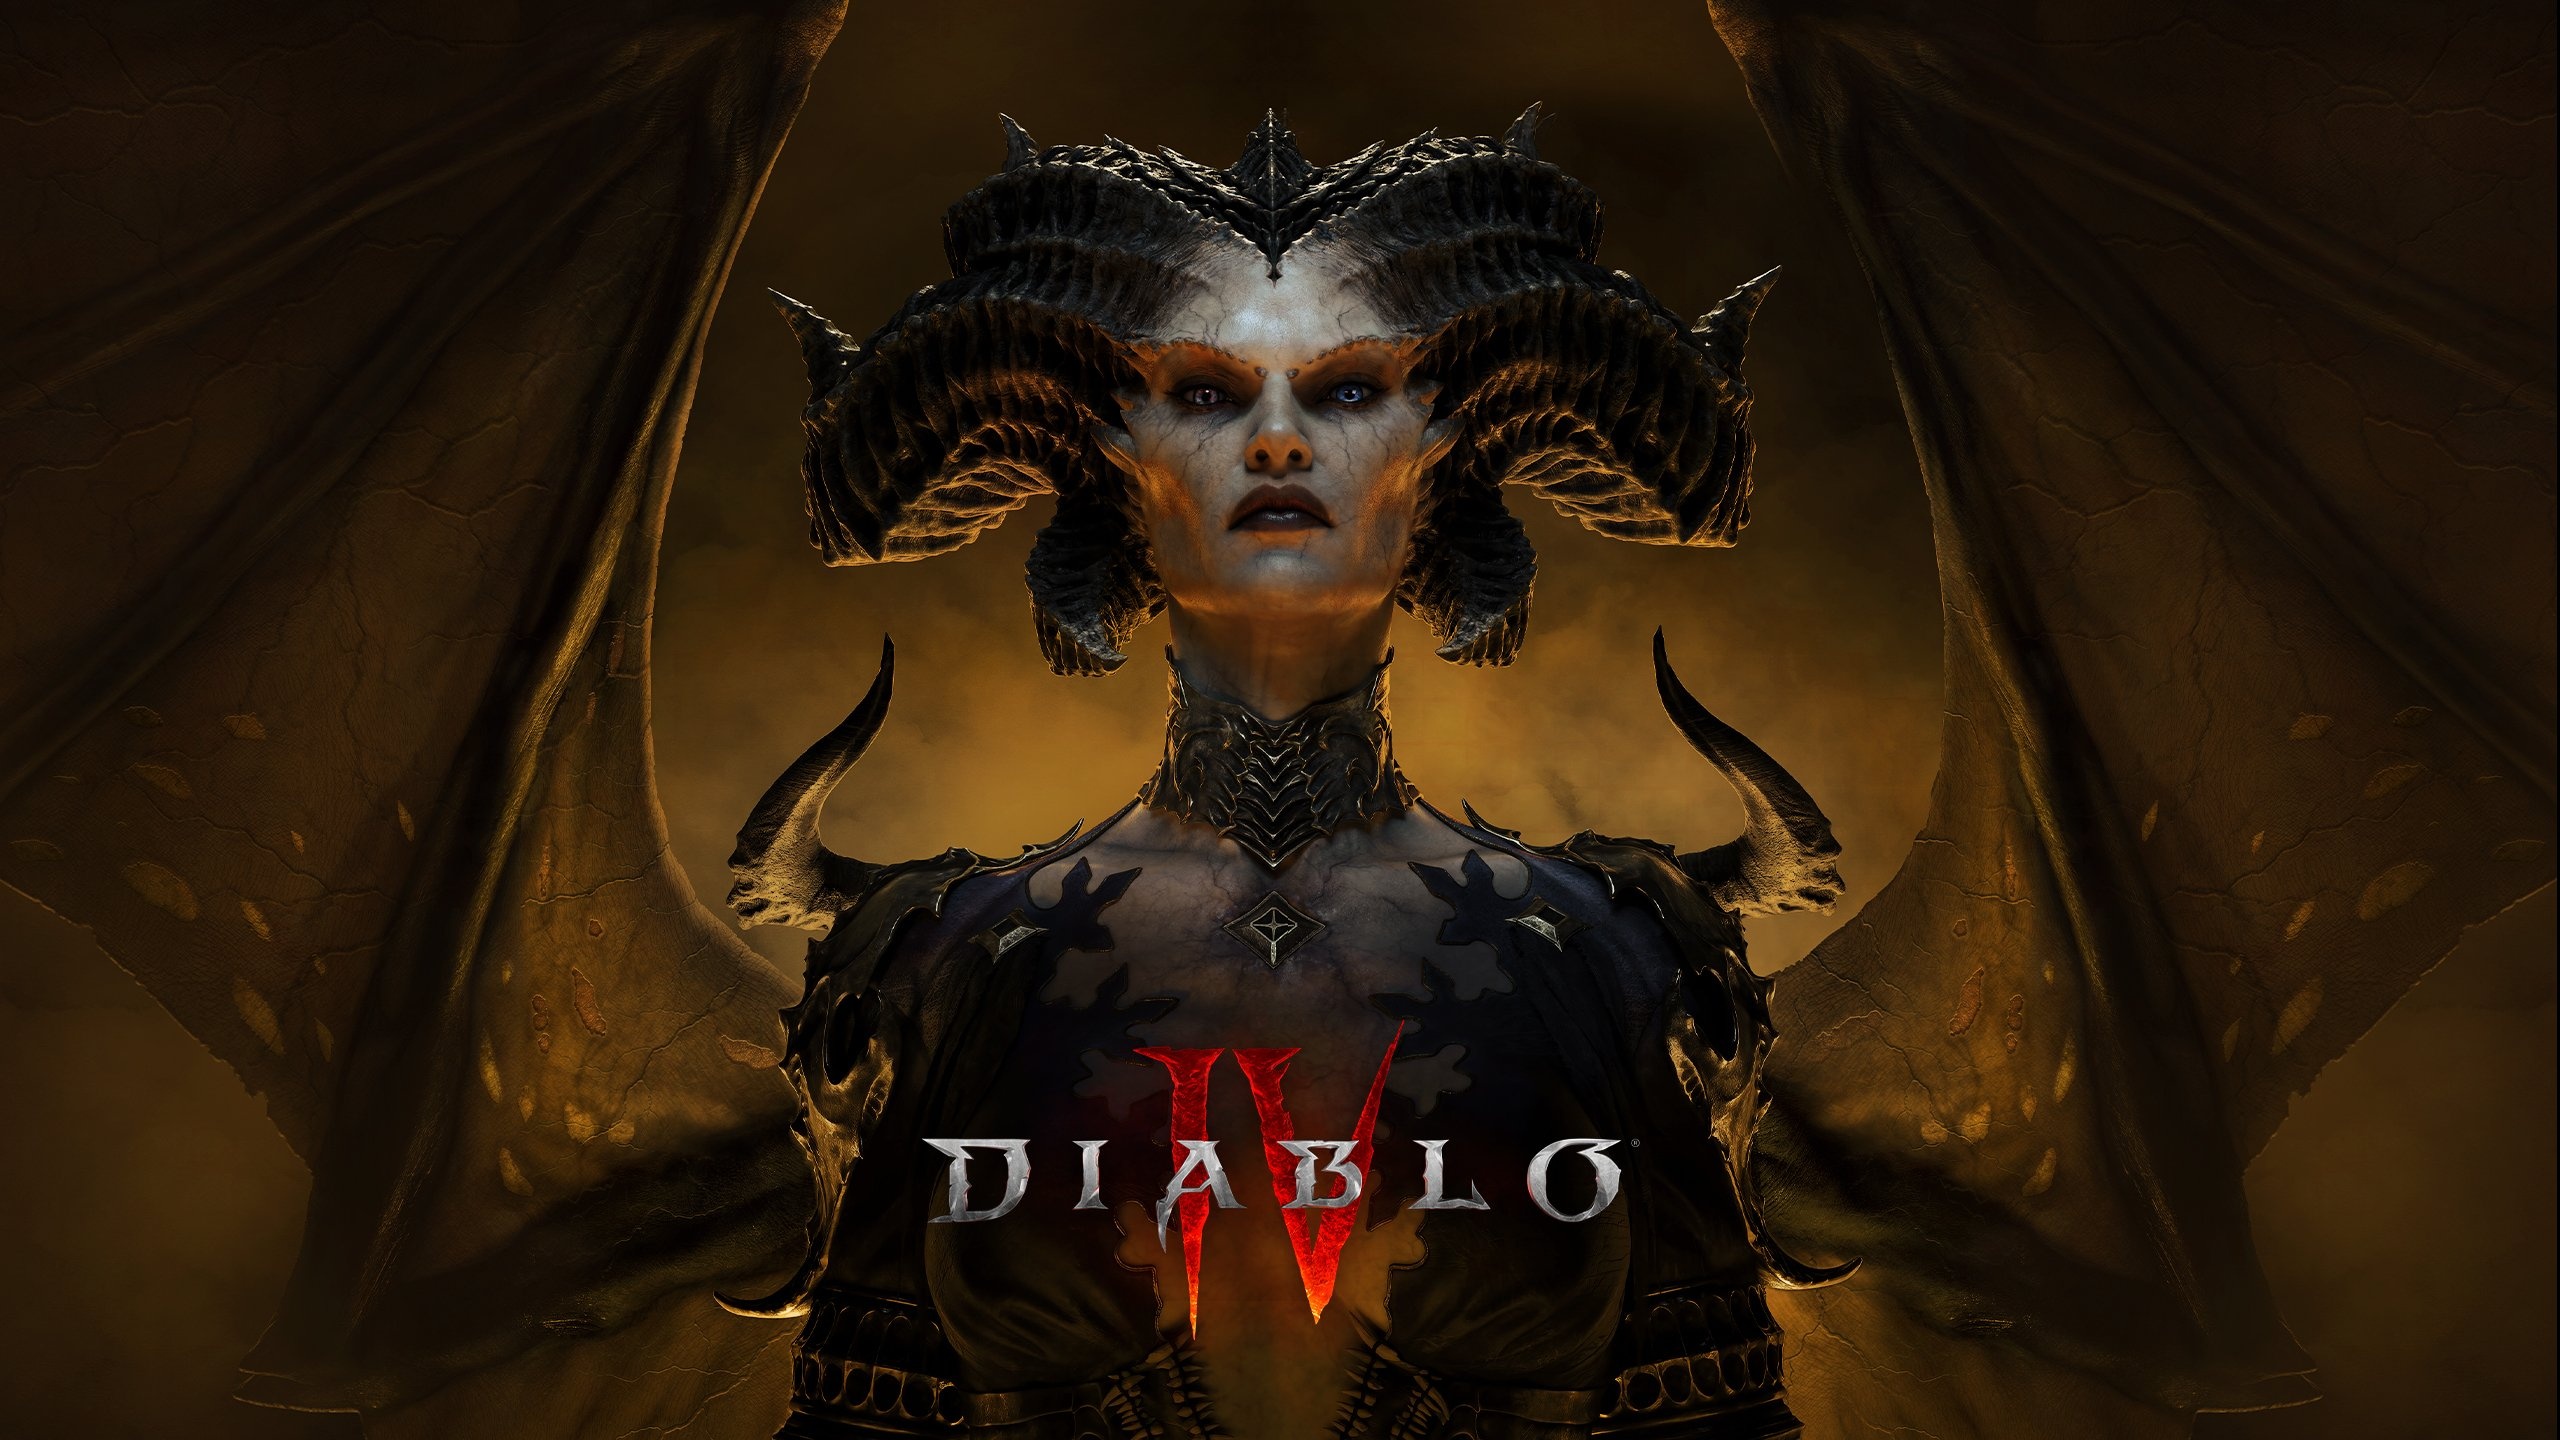 Wallpaper The game, Game, Blizzard Entertainment, Lilith, 2023, Diablo 4, Diablo IV, Demoness for mobile and desktop, section игры, resolution 2560x1440 - download